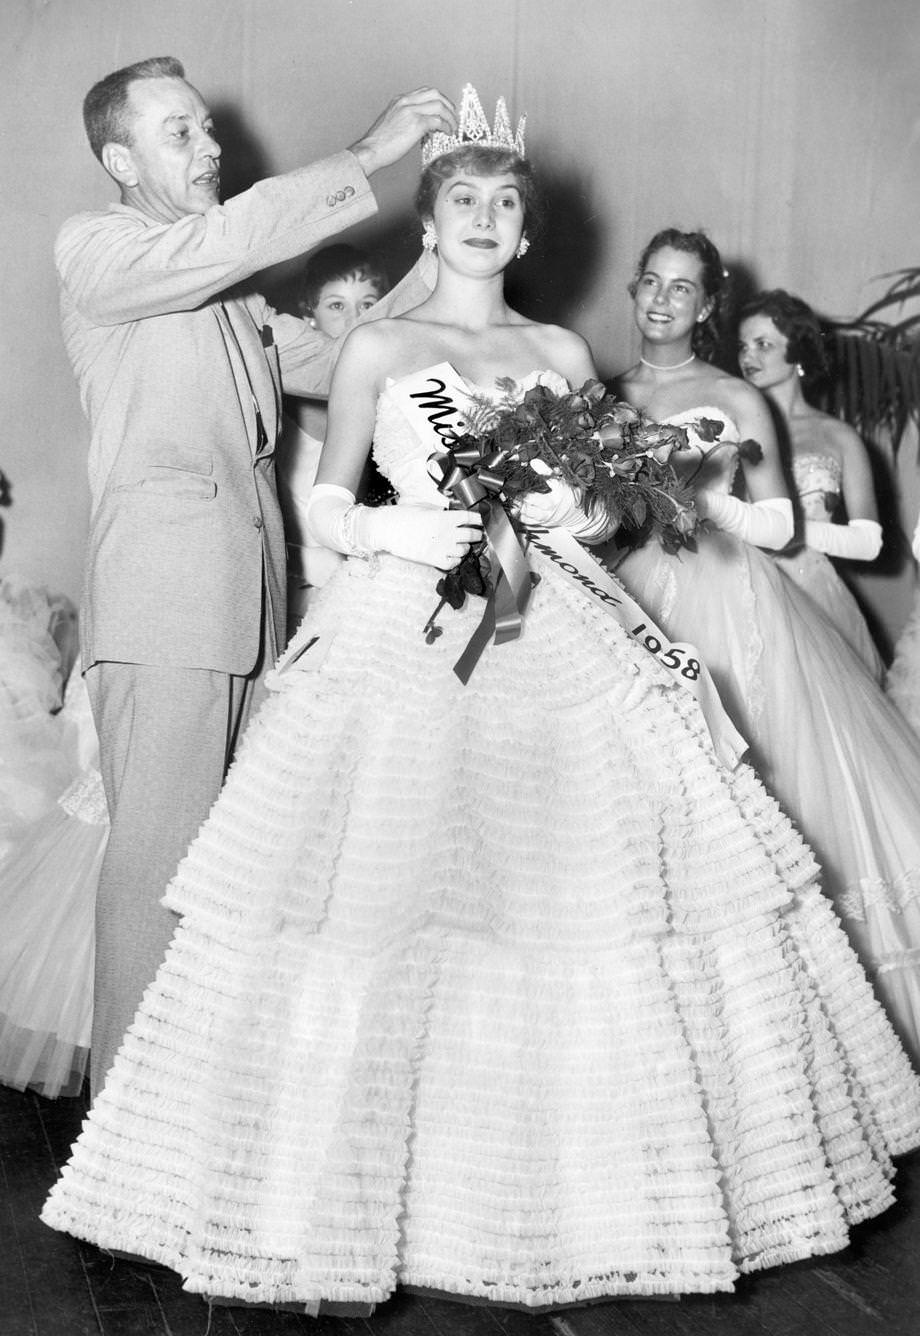 Richmond Mayor F. Henry Garber crowned Grace Jacqueline Allen as Miss Virginia during a ceremony at the Jefferson Hotel downtown, 1958.